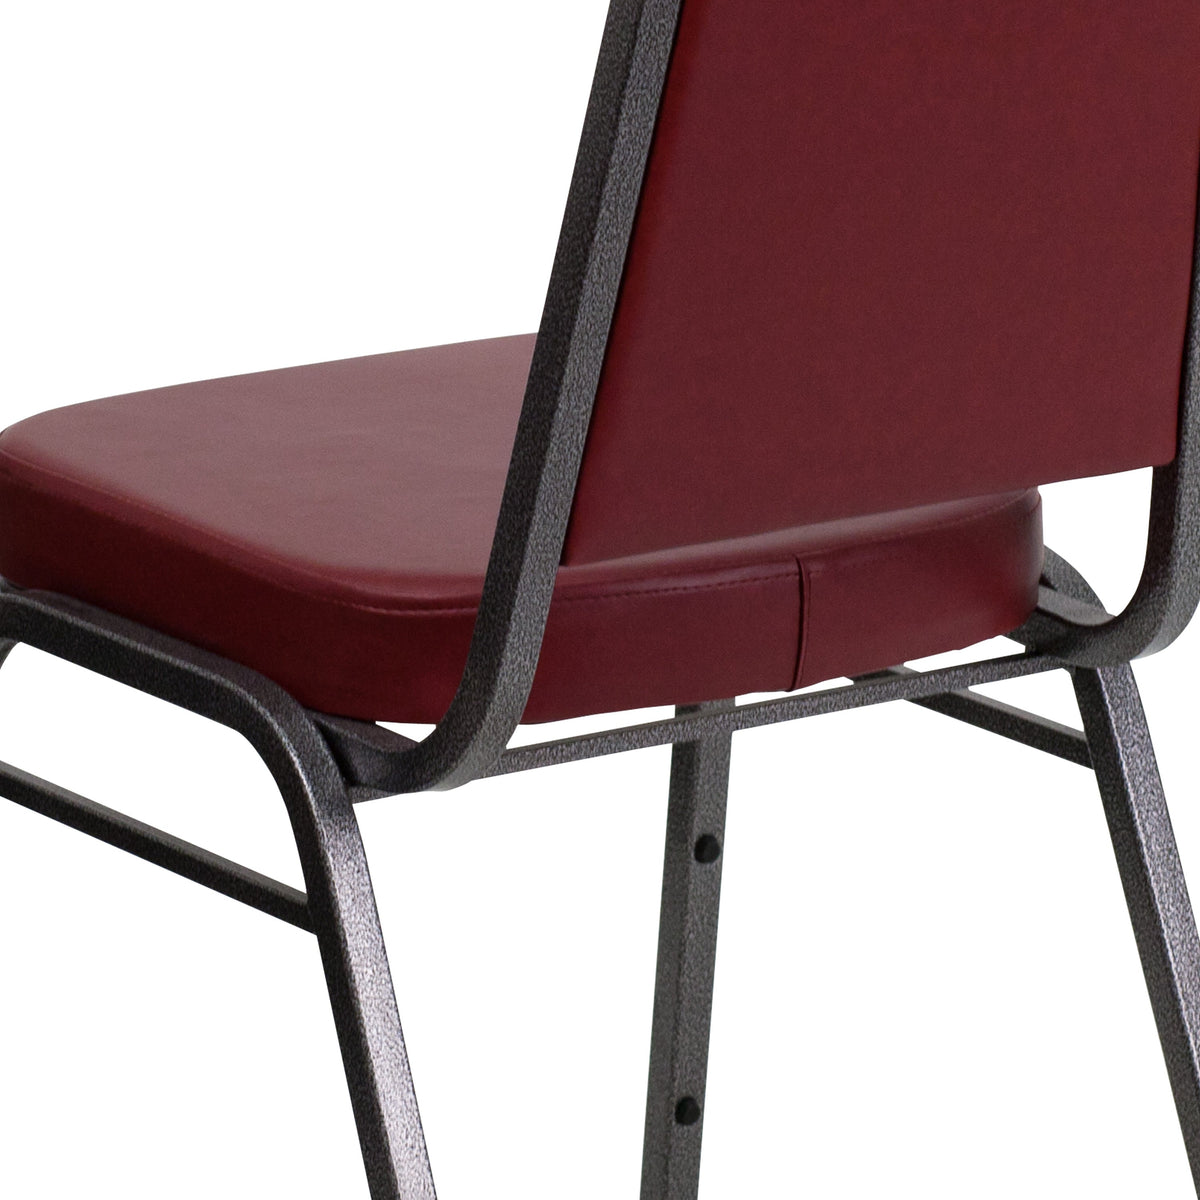 Trapezoidal Back Banquet Chair FD-BHF-1- – Stack Chairs 4 Less